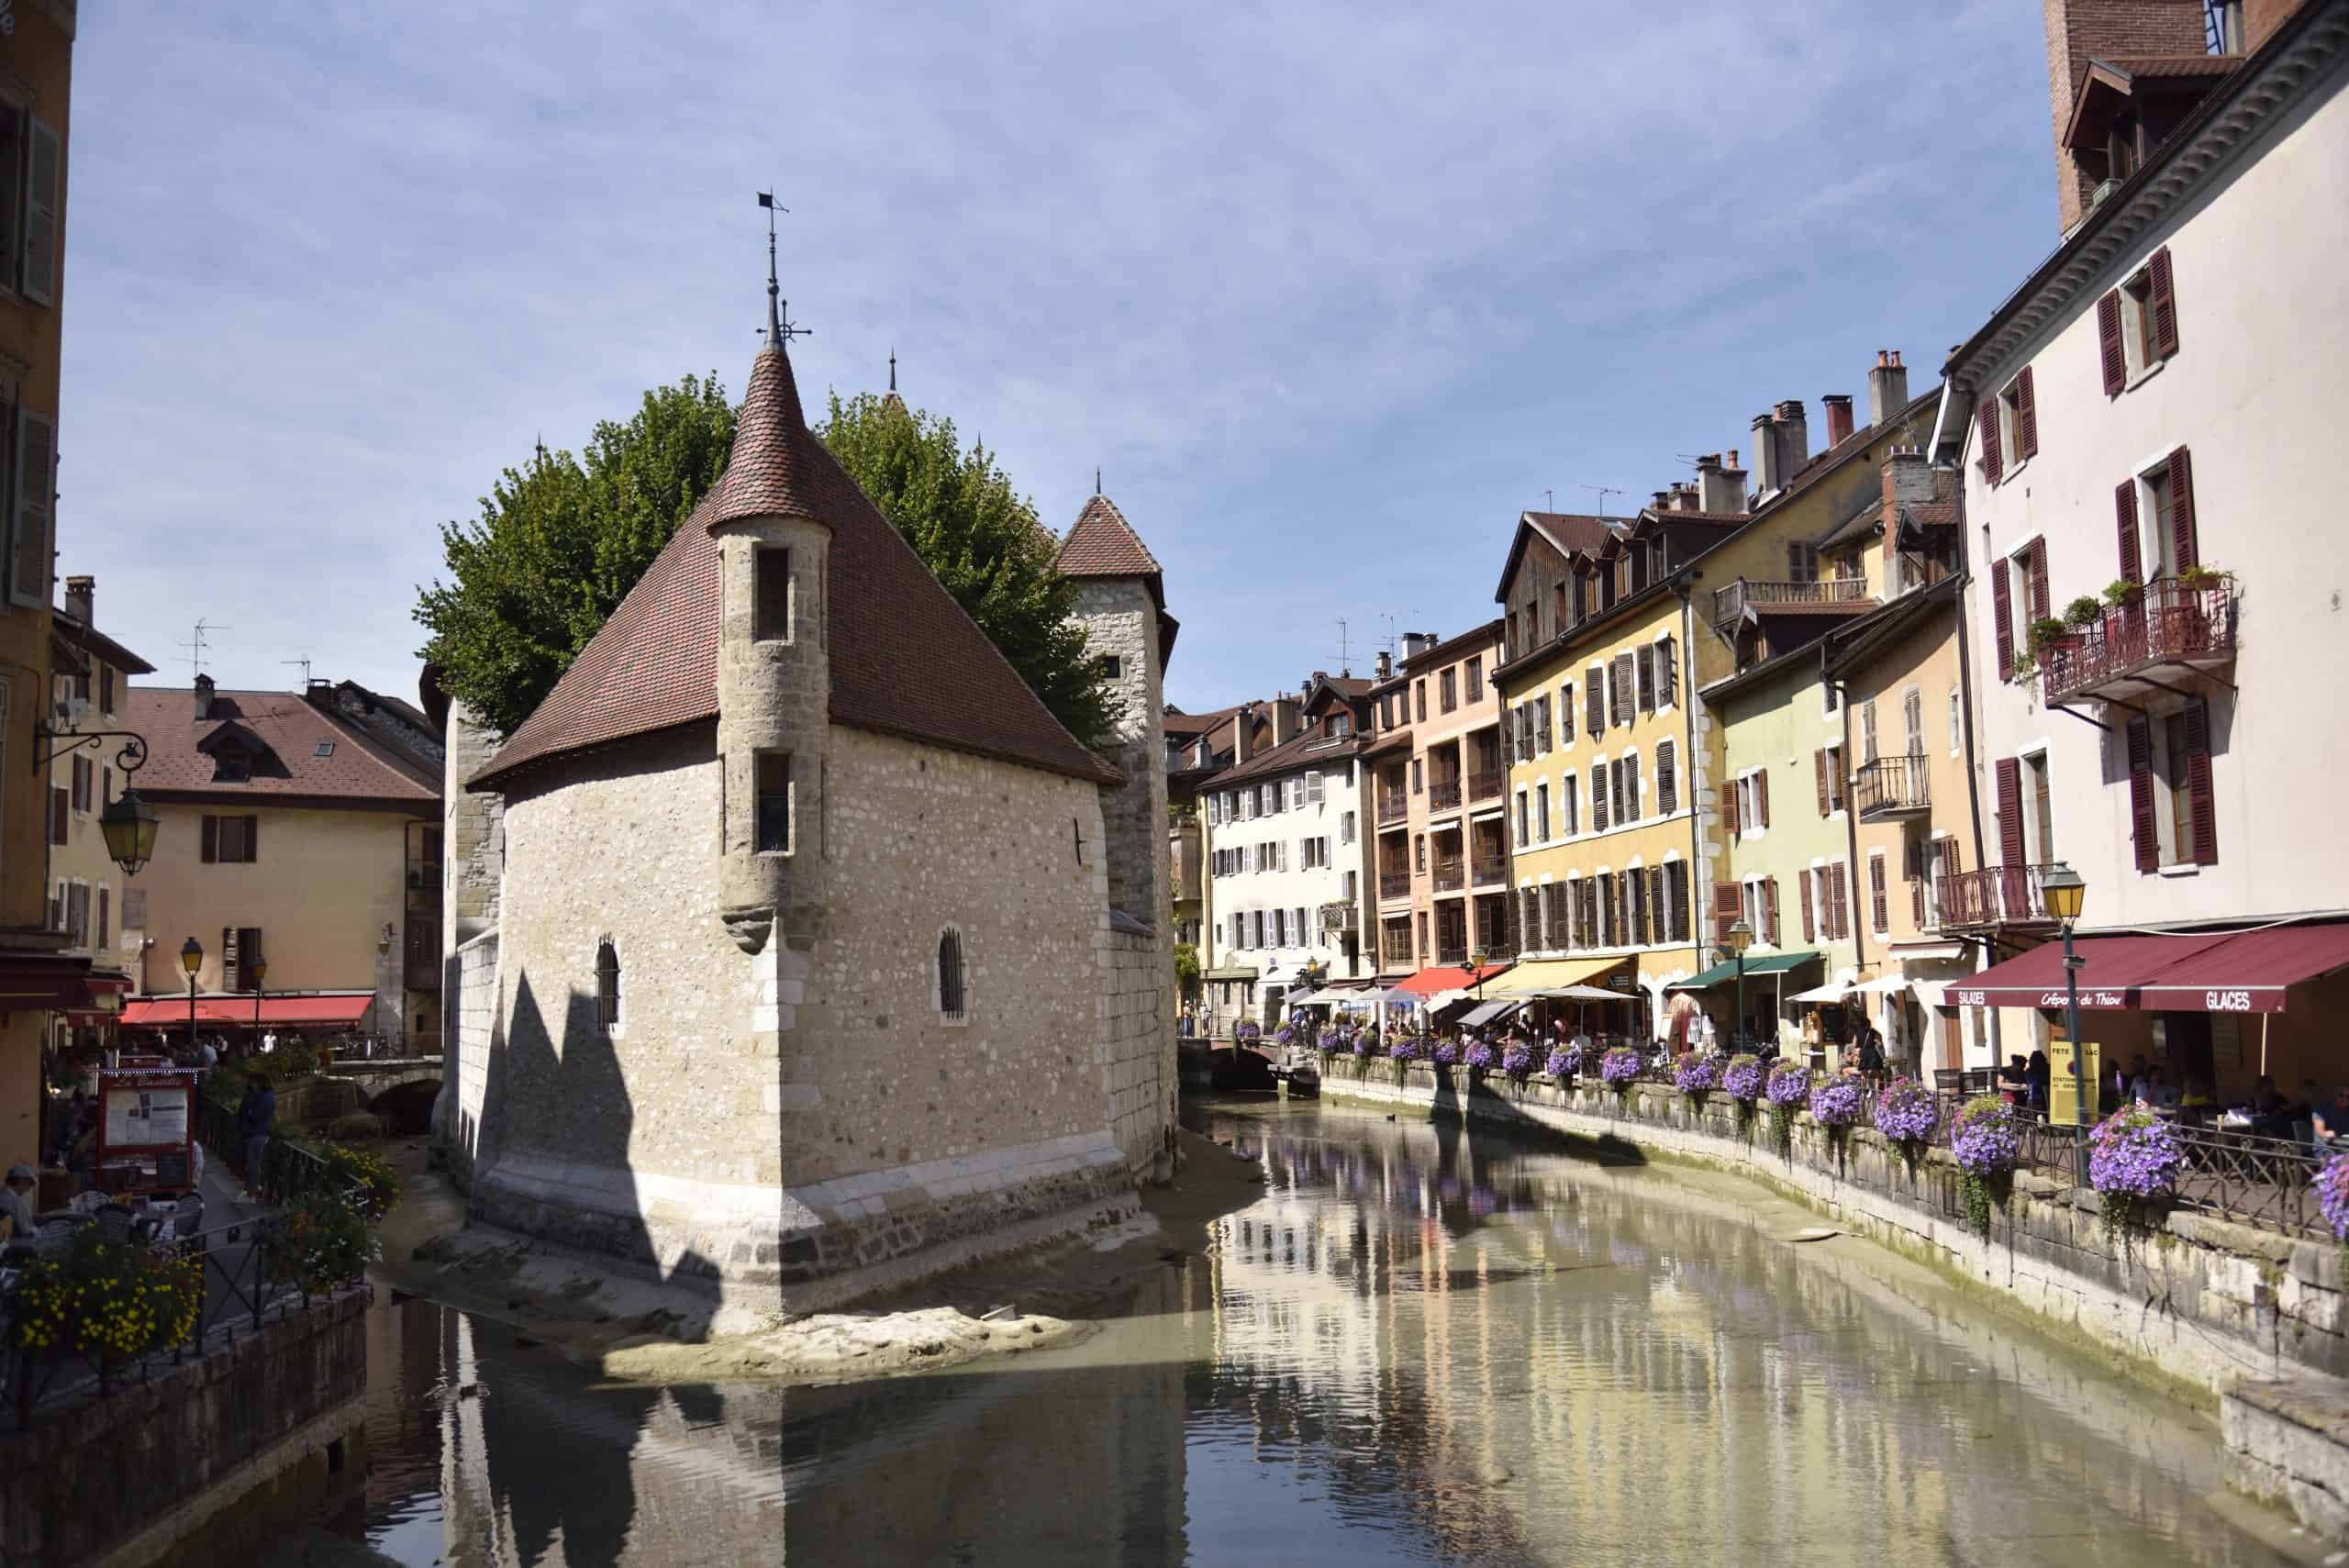 Annecy tourist spots, things to do in Annecy